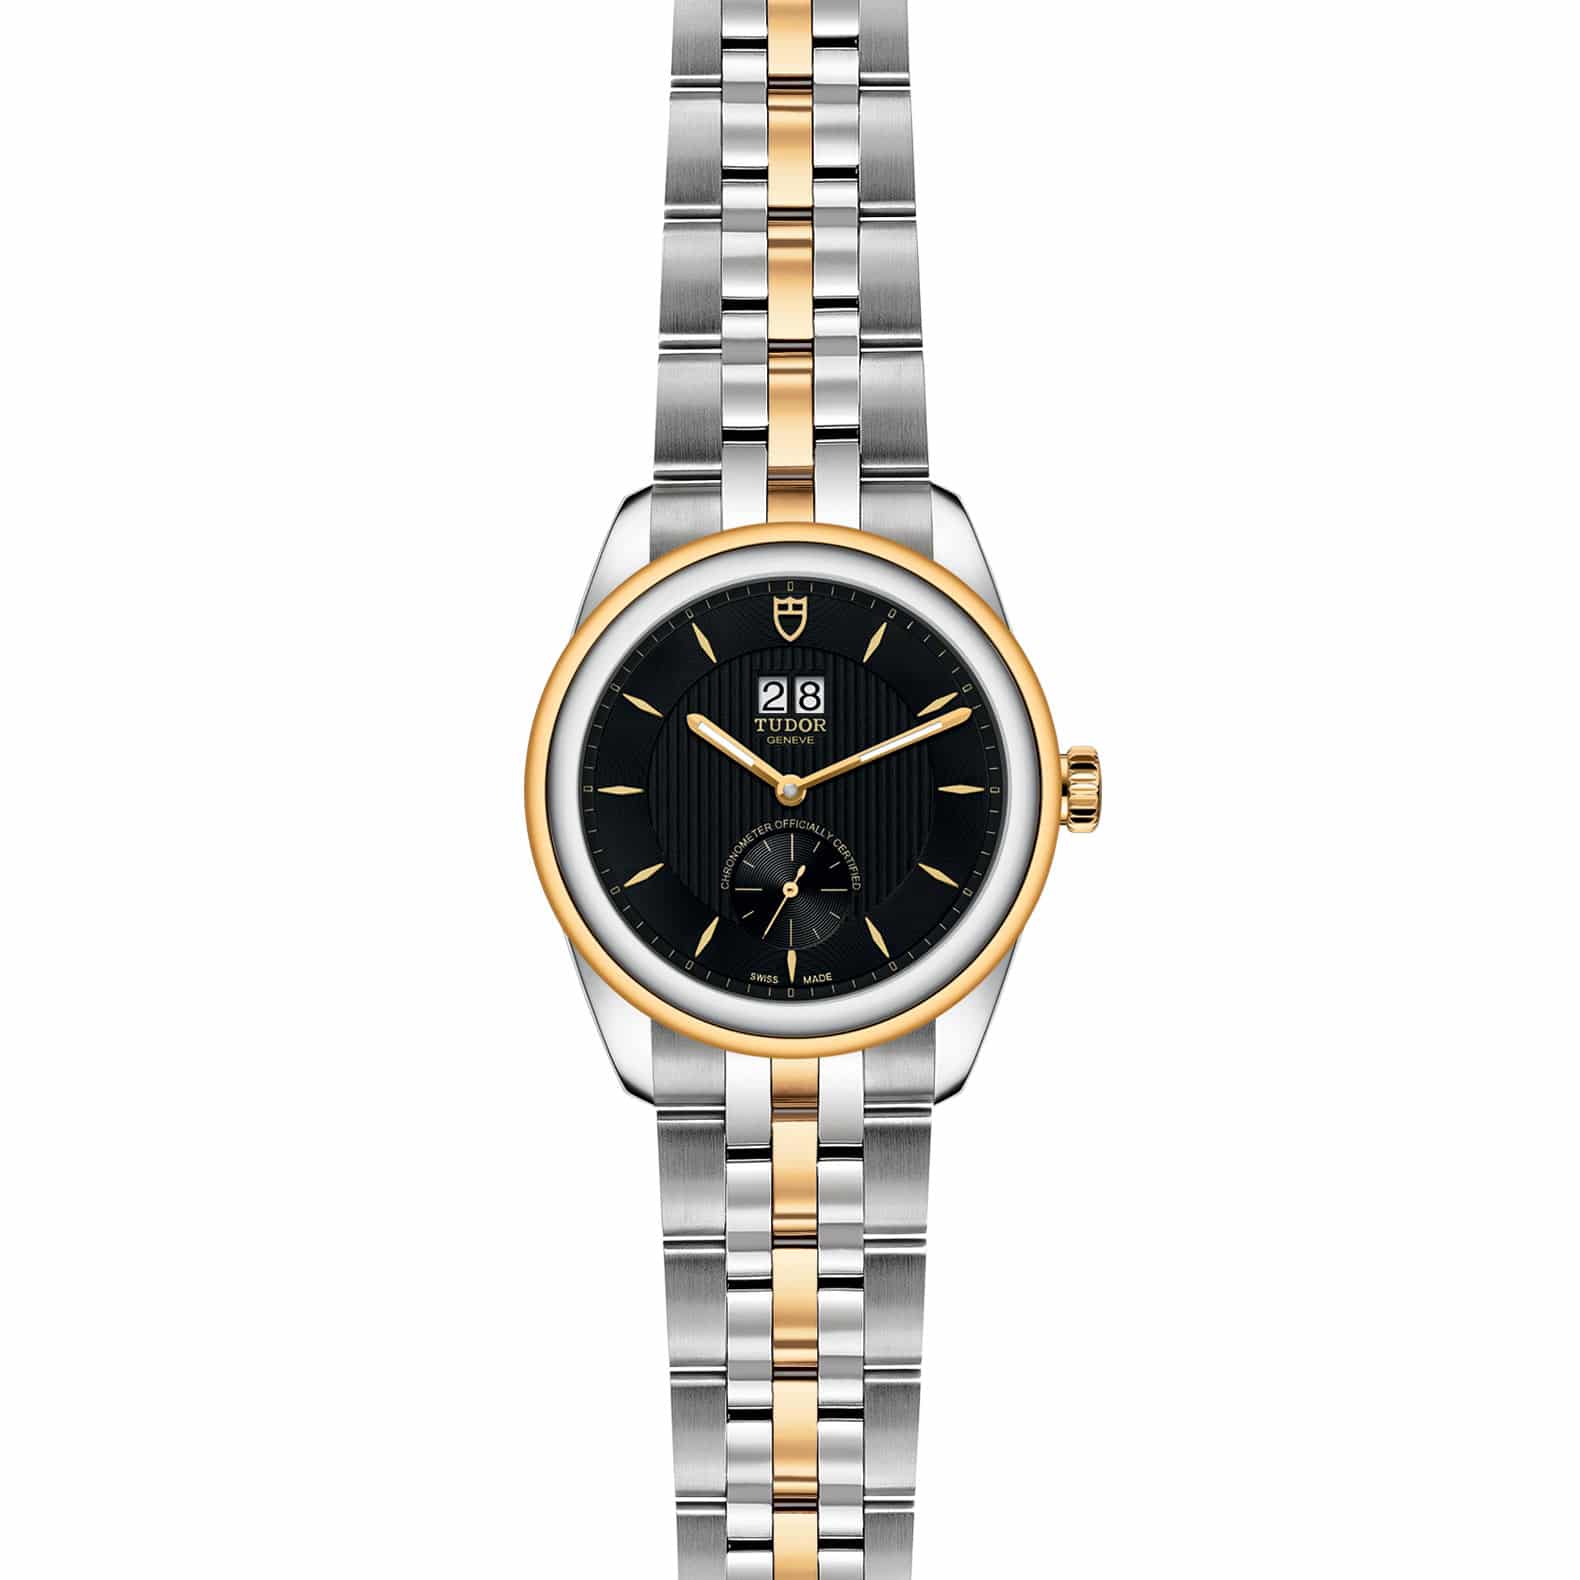 TUDOR Glamour Double Date M57103 0002 Frontfacing